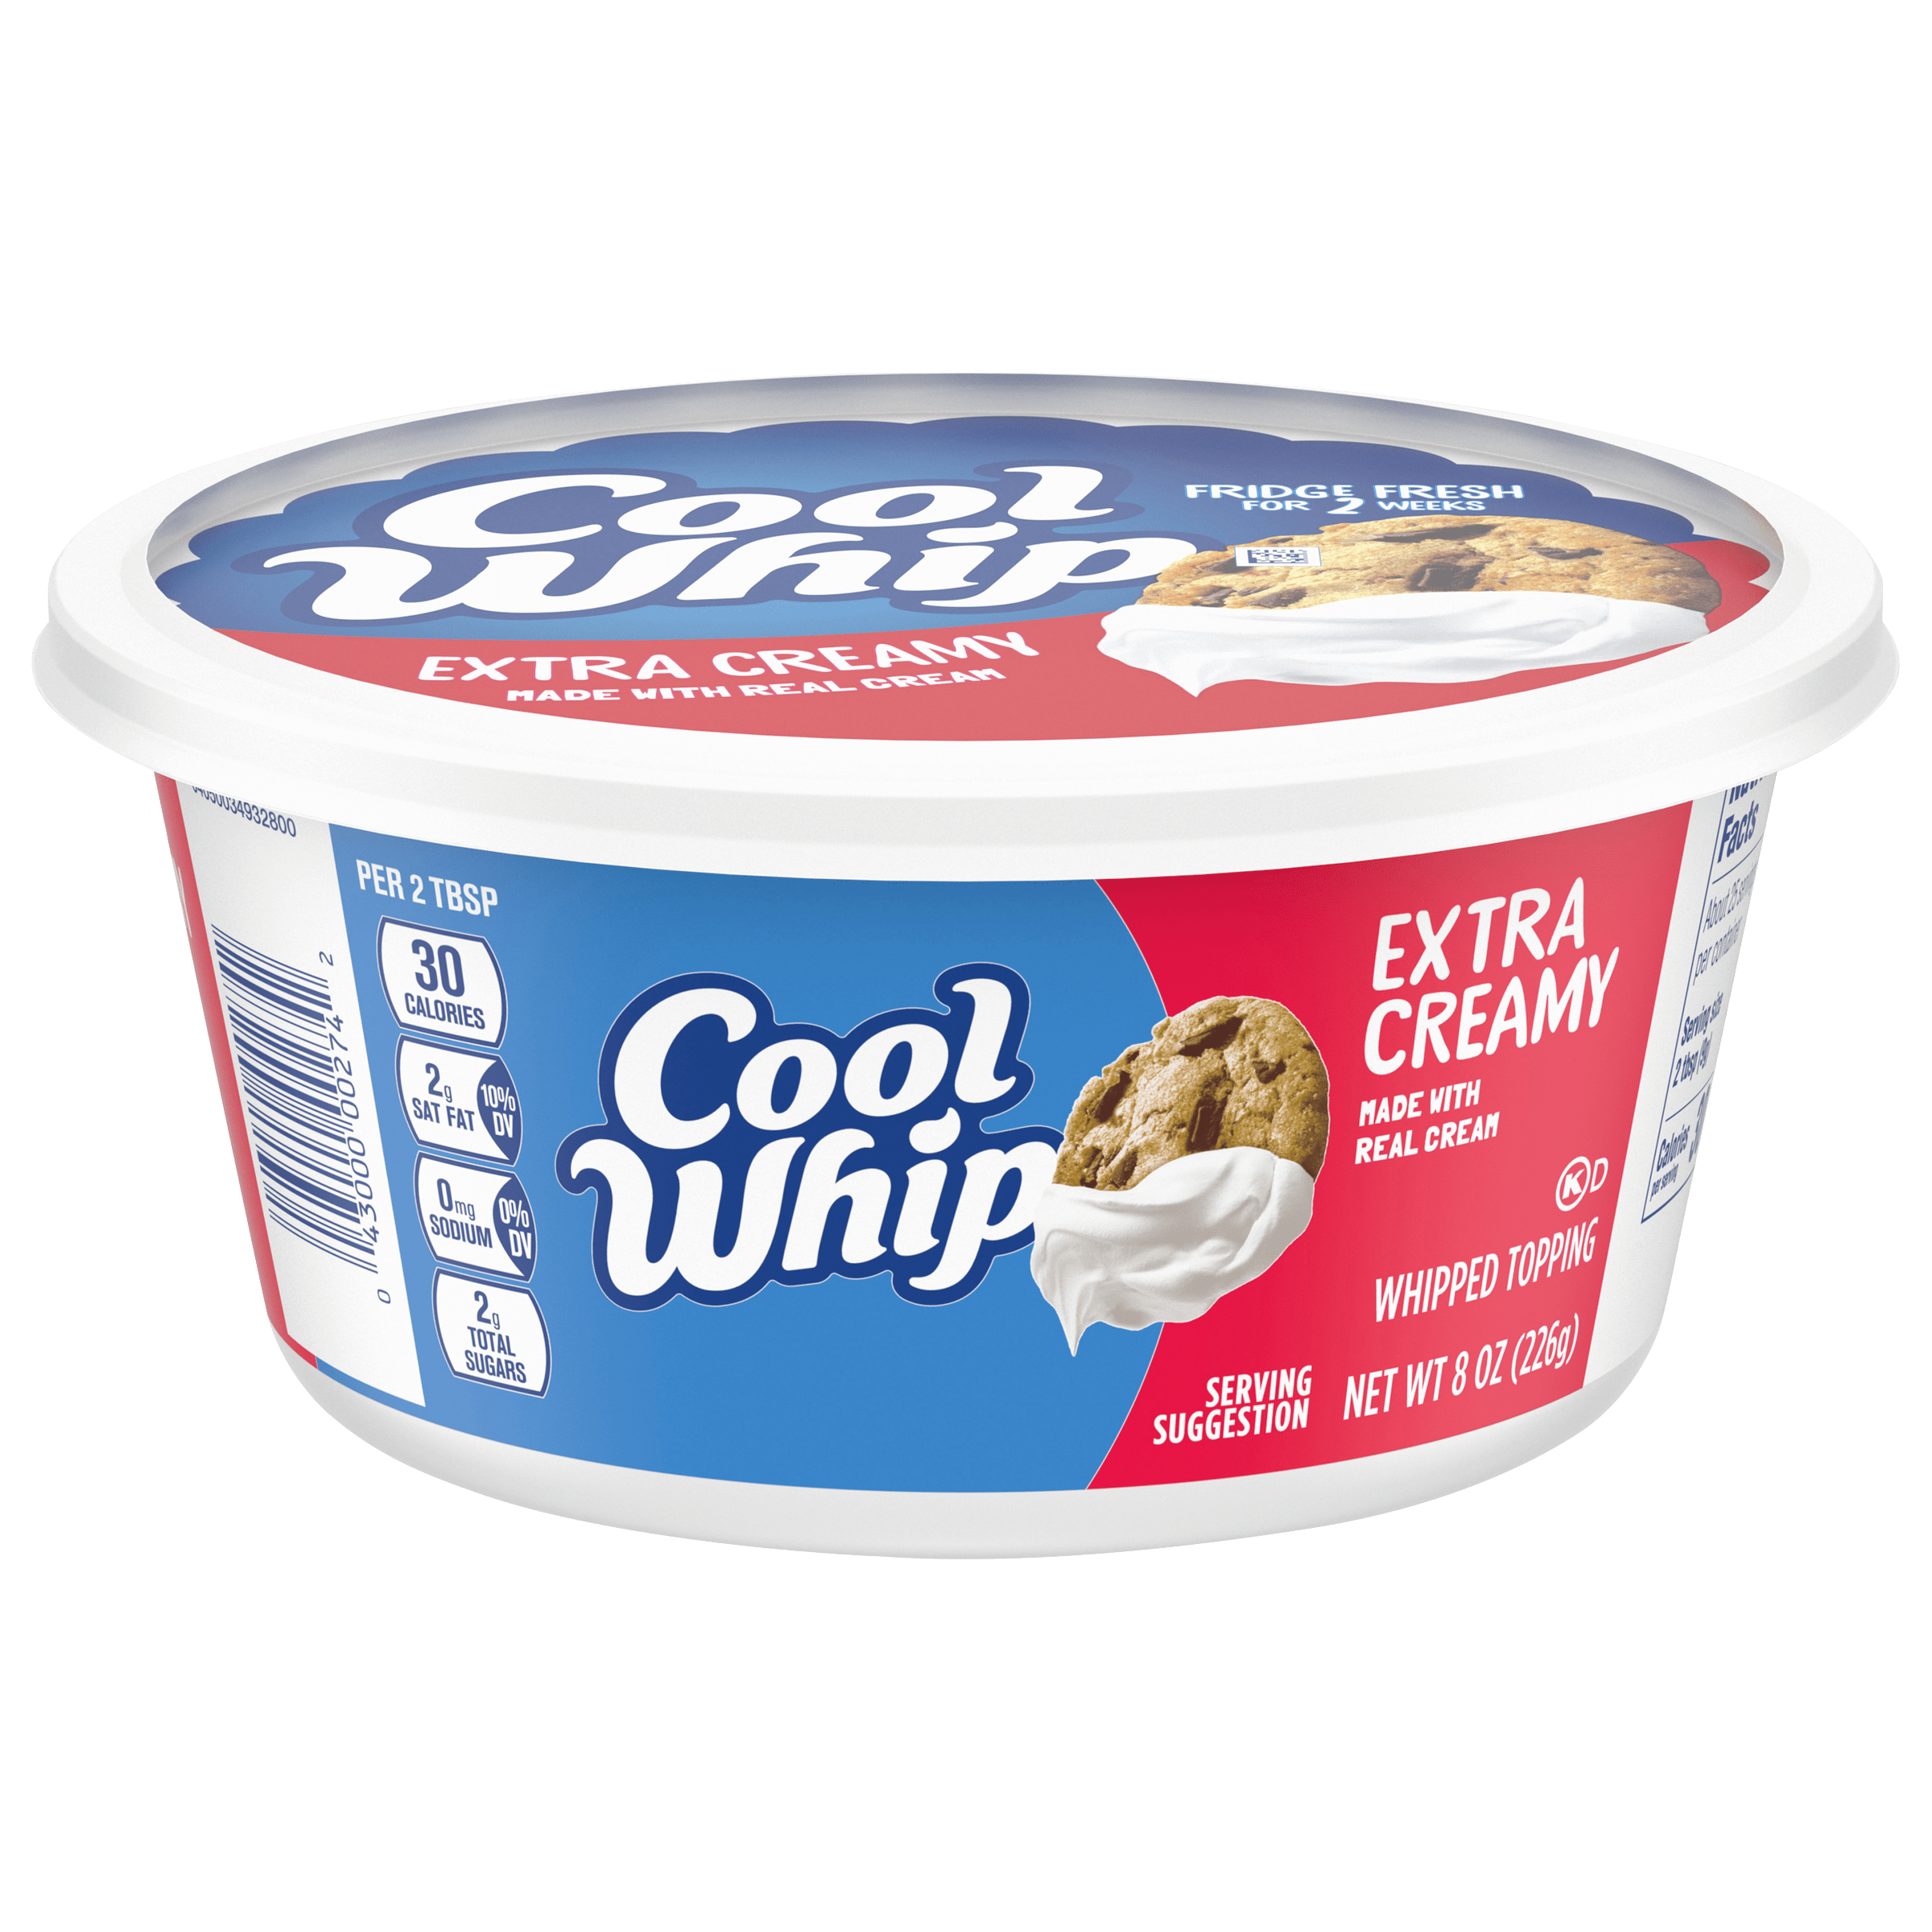 Extra Creamy Whipped Topping